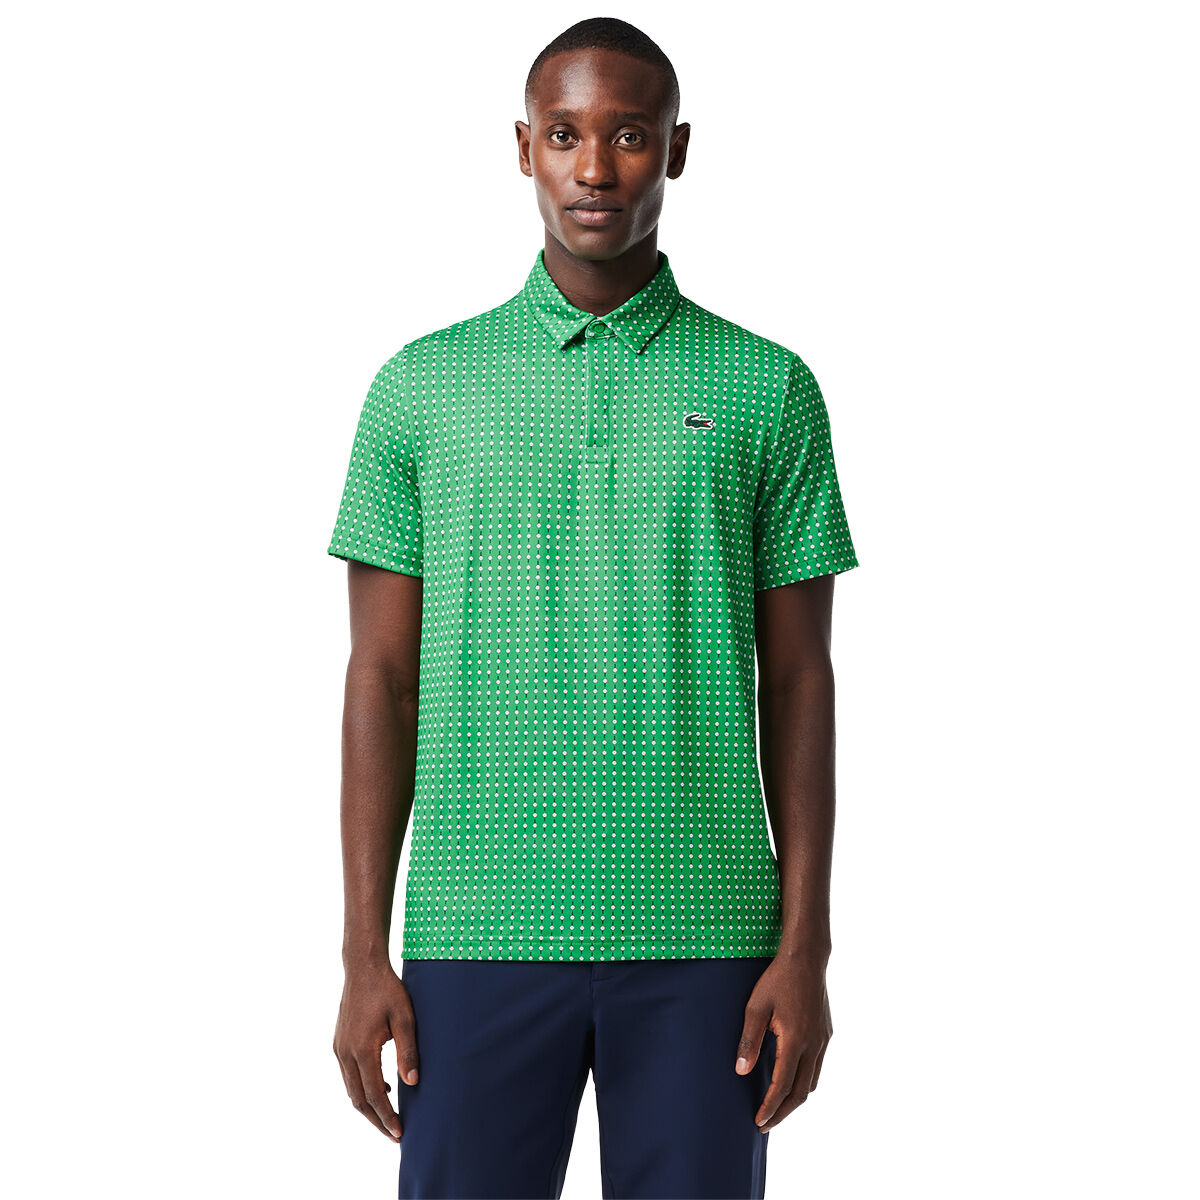 Lacoste Men's All-Over Print Golf Polo Shirt, Mens, Green, Large | American Golf von Lacoste